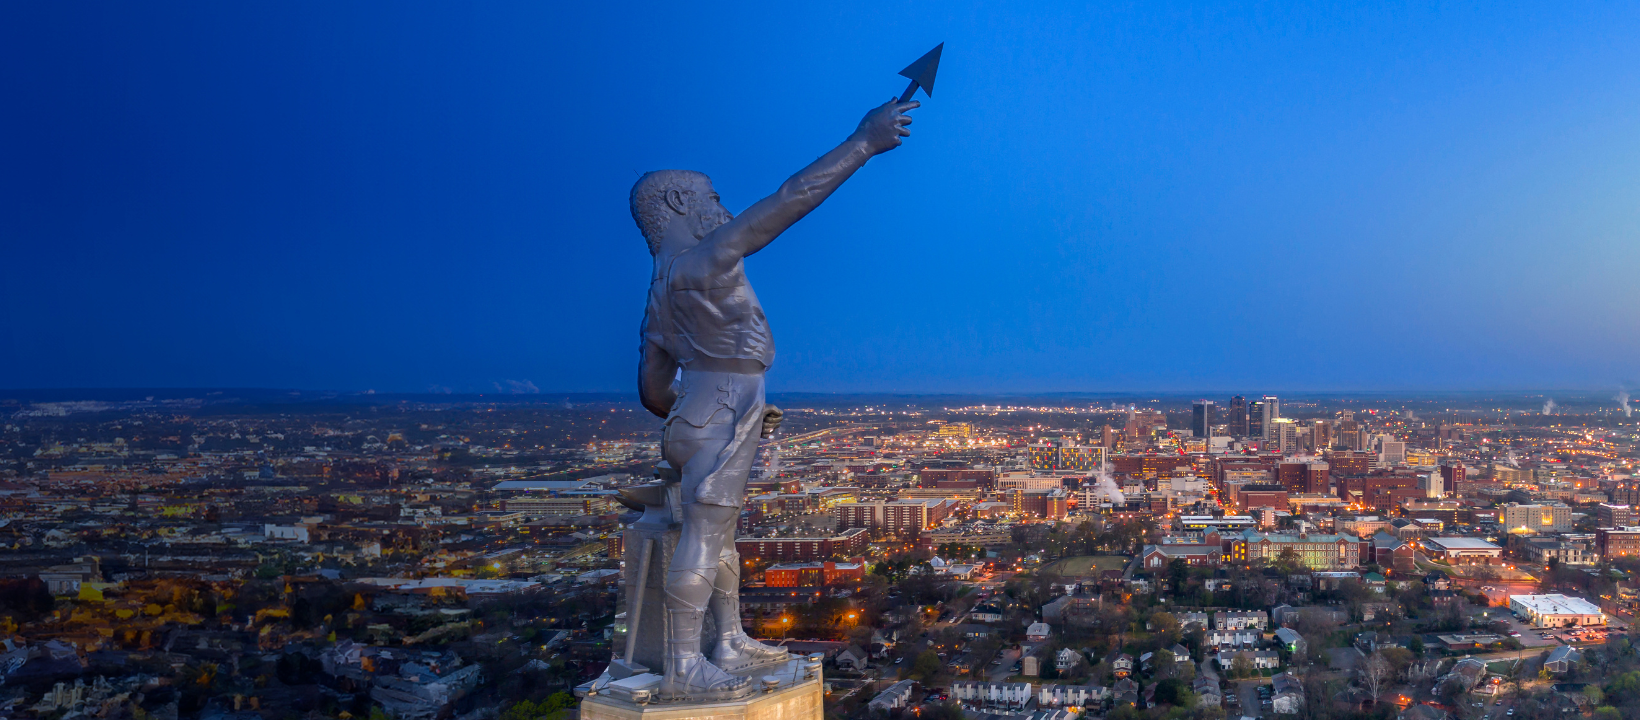 Aerial view of the Vulcan Statue with the city of Birmingham skyline in the background.